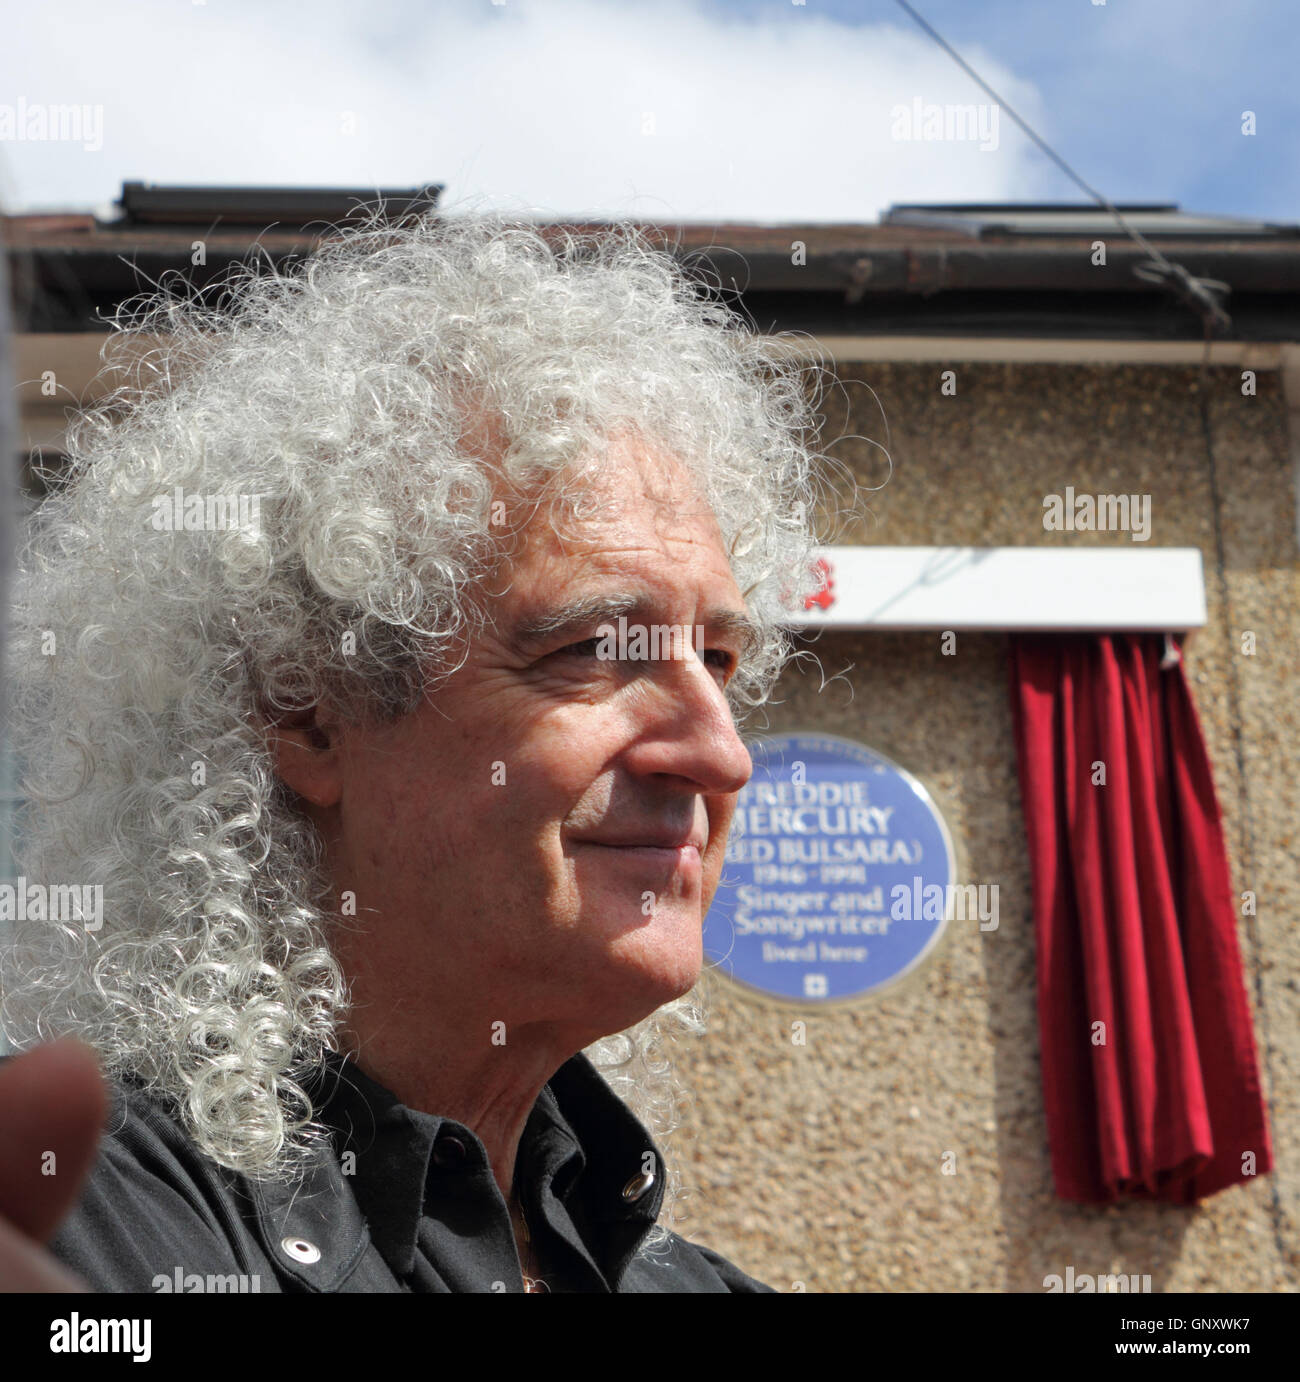 Feltham, London, England, UK. 1st September 2016.  Brian May from rock group Queen unveiled an English Heritage Blue Plaque for the former lead singer Freddie Mercury. On what would have been Freddie's 70th birthday the Blue Plaque showing his birth name Fred Bulsara was unveiled on his former home at Feltham in West London, where he lived with his family in the 1970's. Credit:  Julia Gavin UK/Alamy Live News Stock Photo